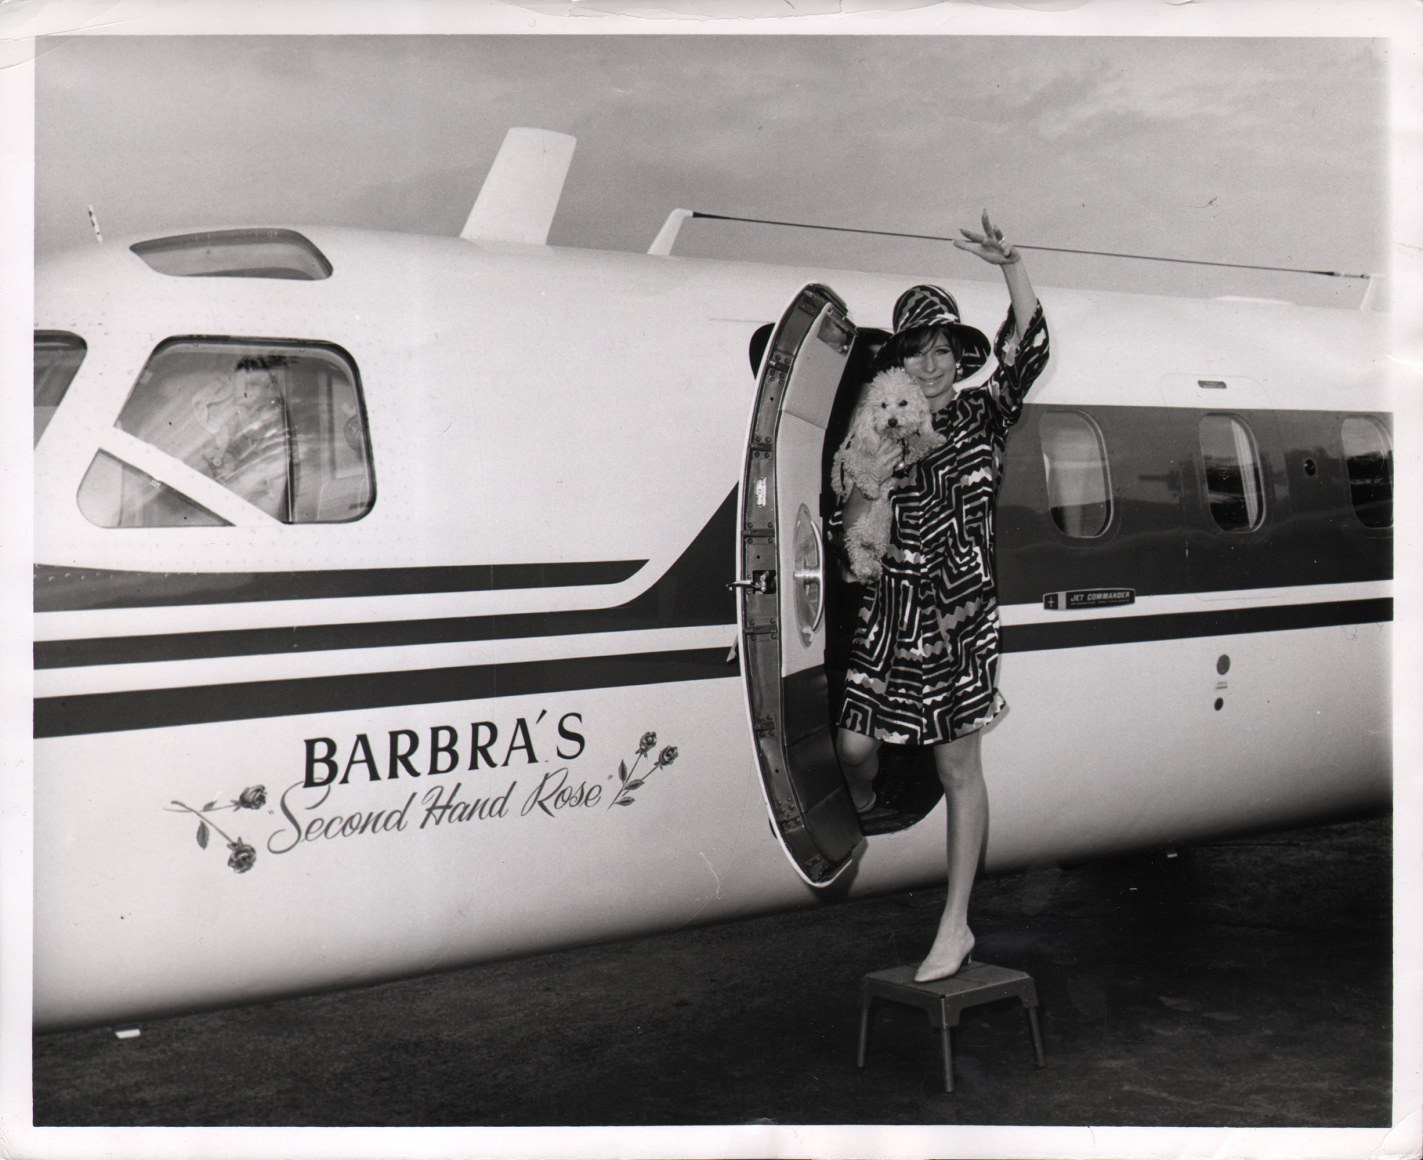 49. Photo Gratis, New York: Entertainer Barbra Streisand, ​August 5, 1966. Streisand steps off of a plane marked &quot;Barbra's Second Hand Rose,&quot; waving and carrying a small dog.